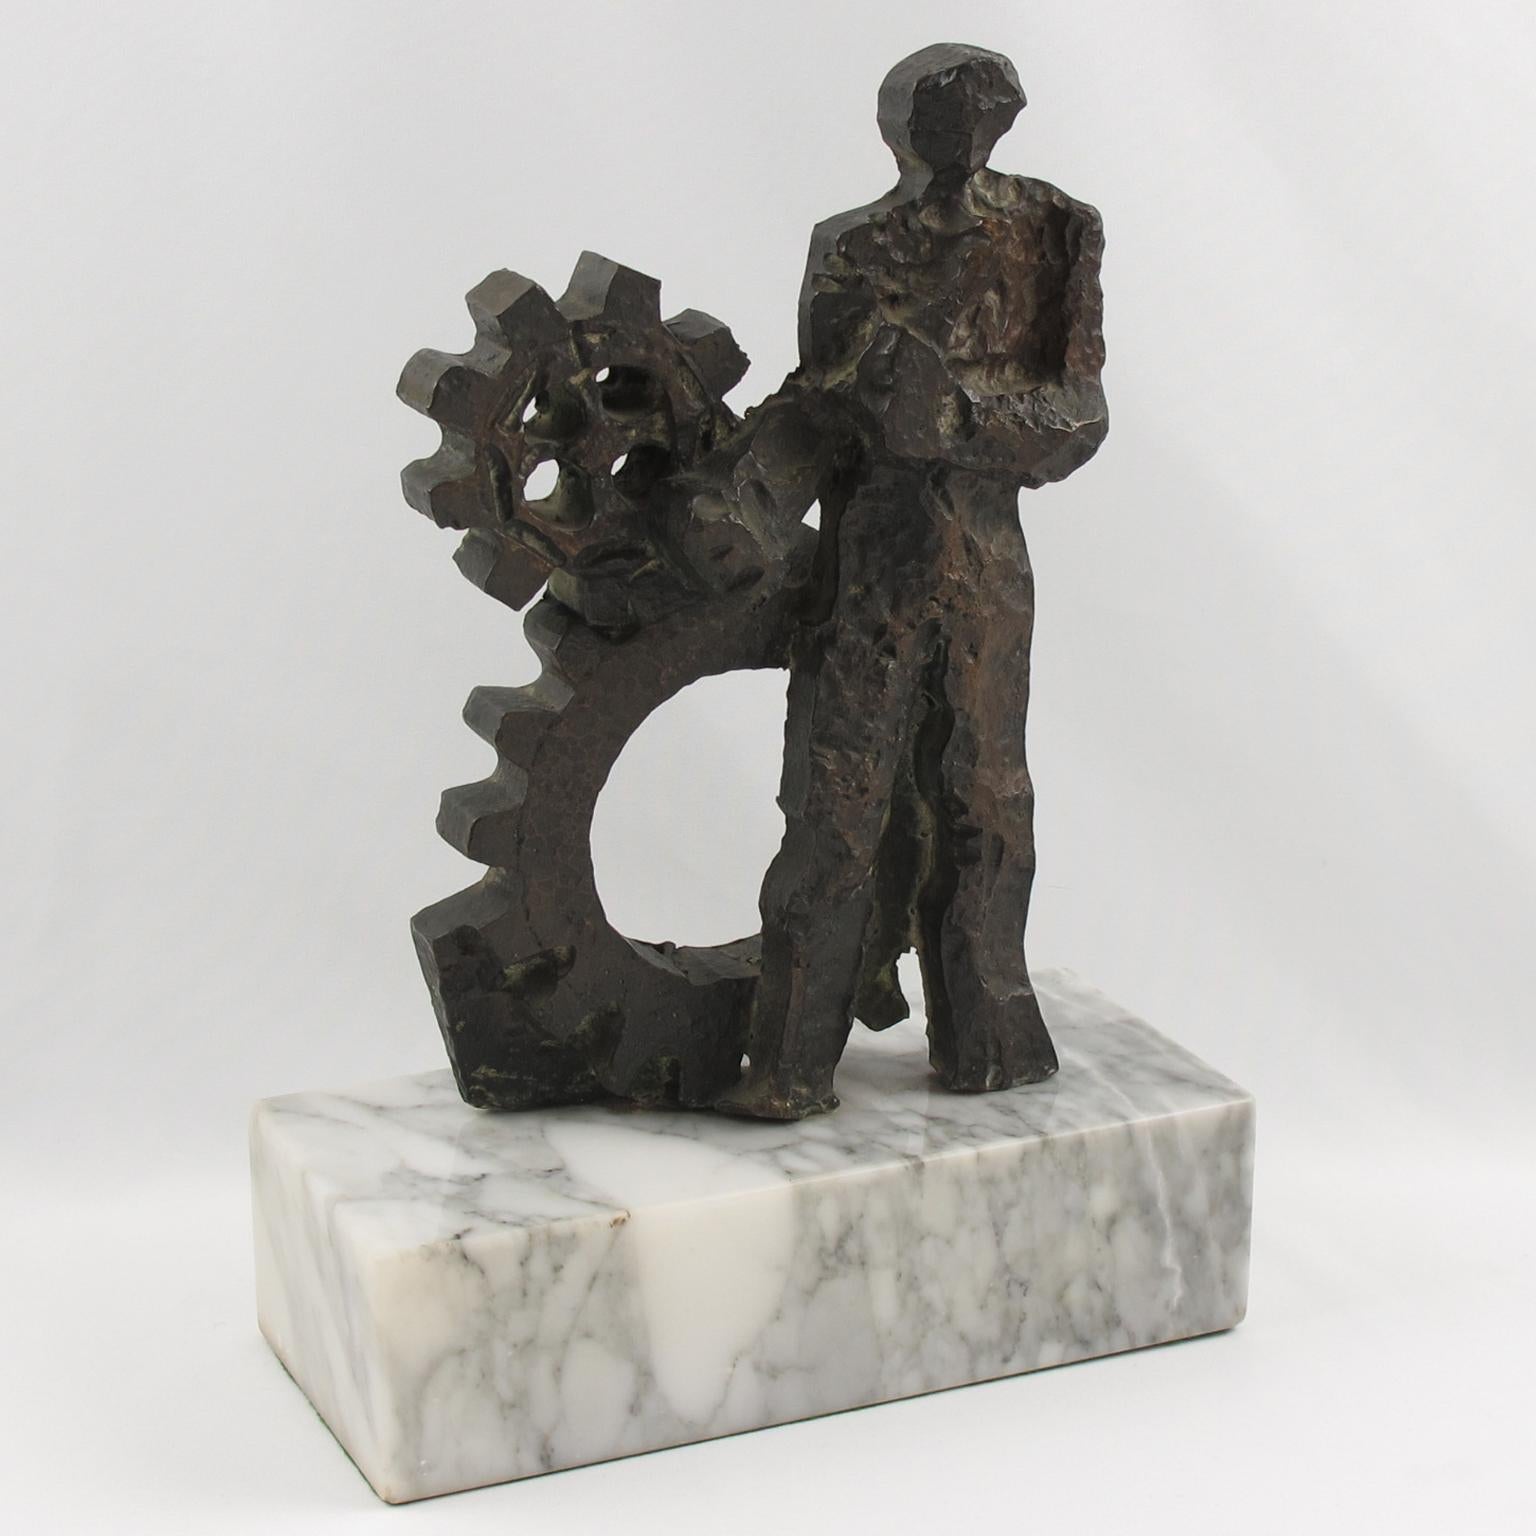 This superb modern brutalist bronze sculpture from the 1970s represents an allegory of man and machine (or worker) with a beautiful original dark green patina. The design is striking from every angle. The sculpture is intentionally raw and hollow at